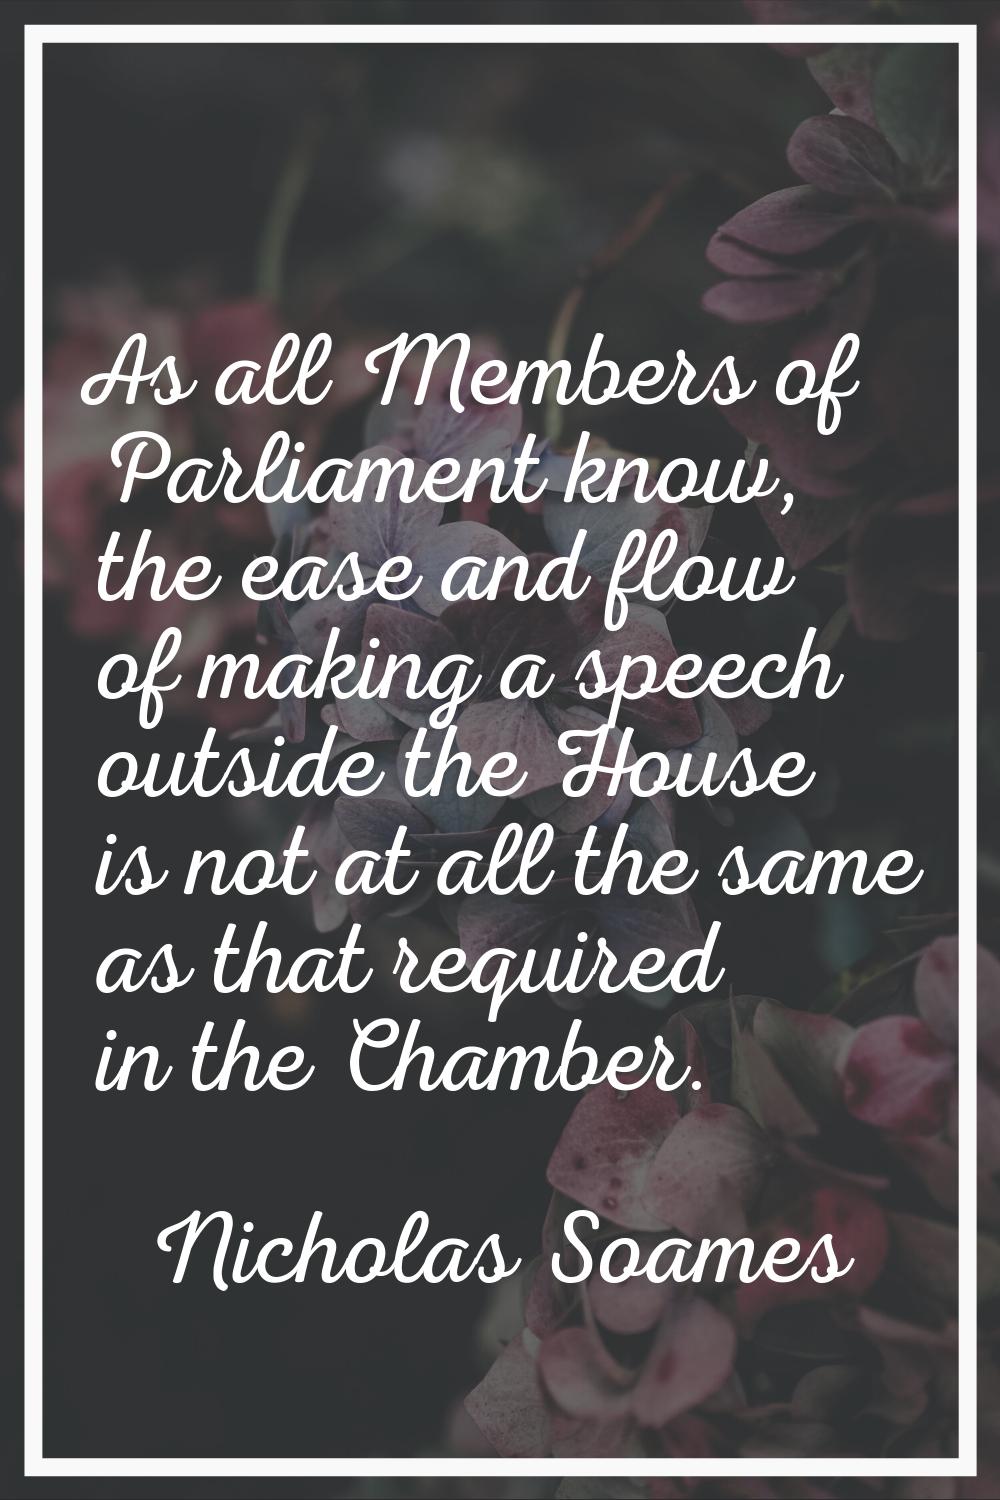 As all Members of Parliament know, the ease and flow of making a speech outside the House is not at